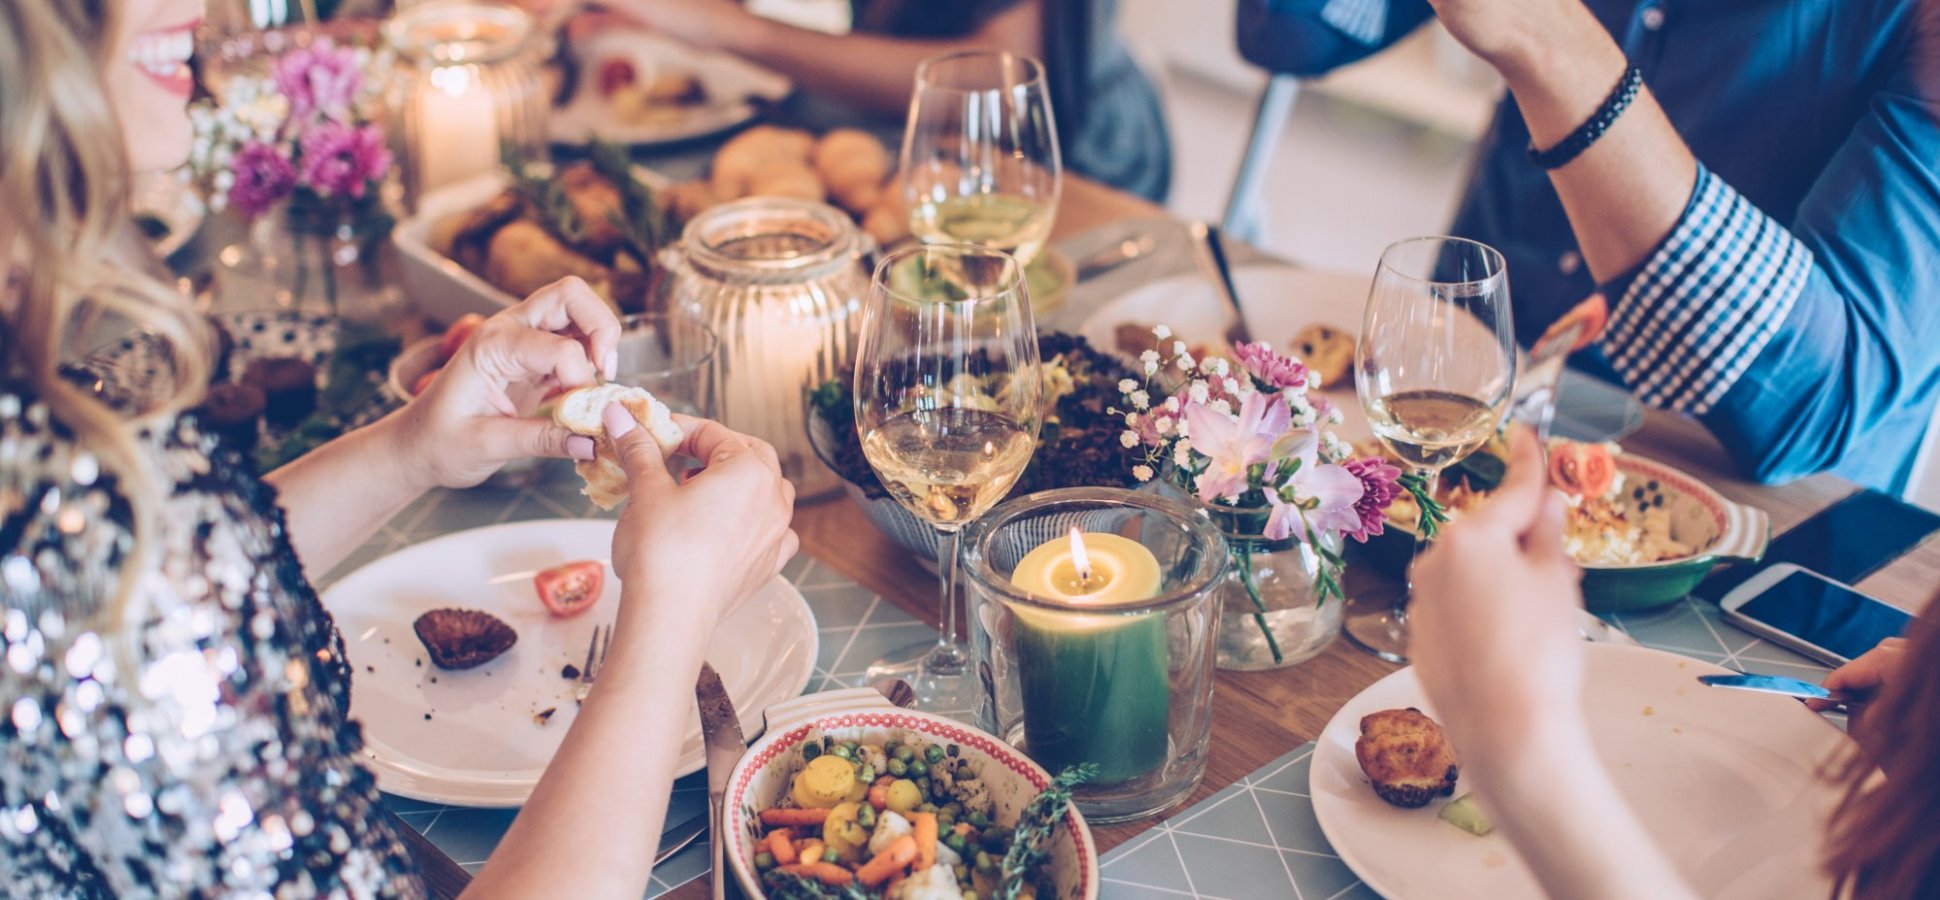 5 Reasons More People Are Opting For Private Dinner Parties